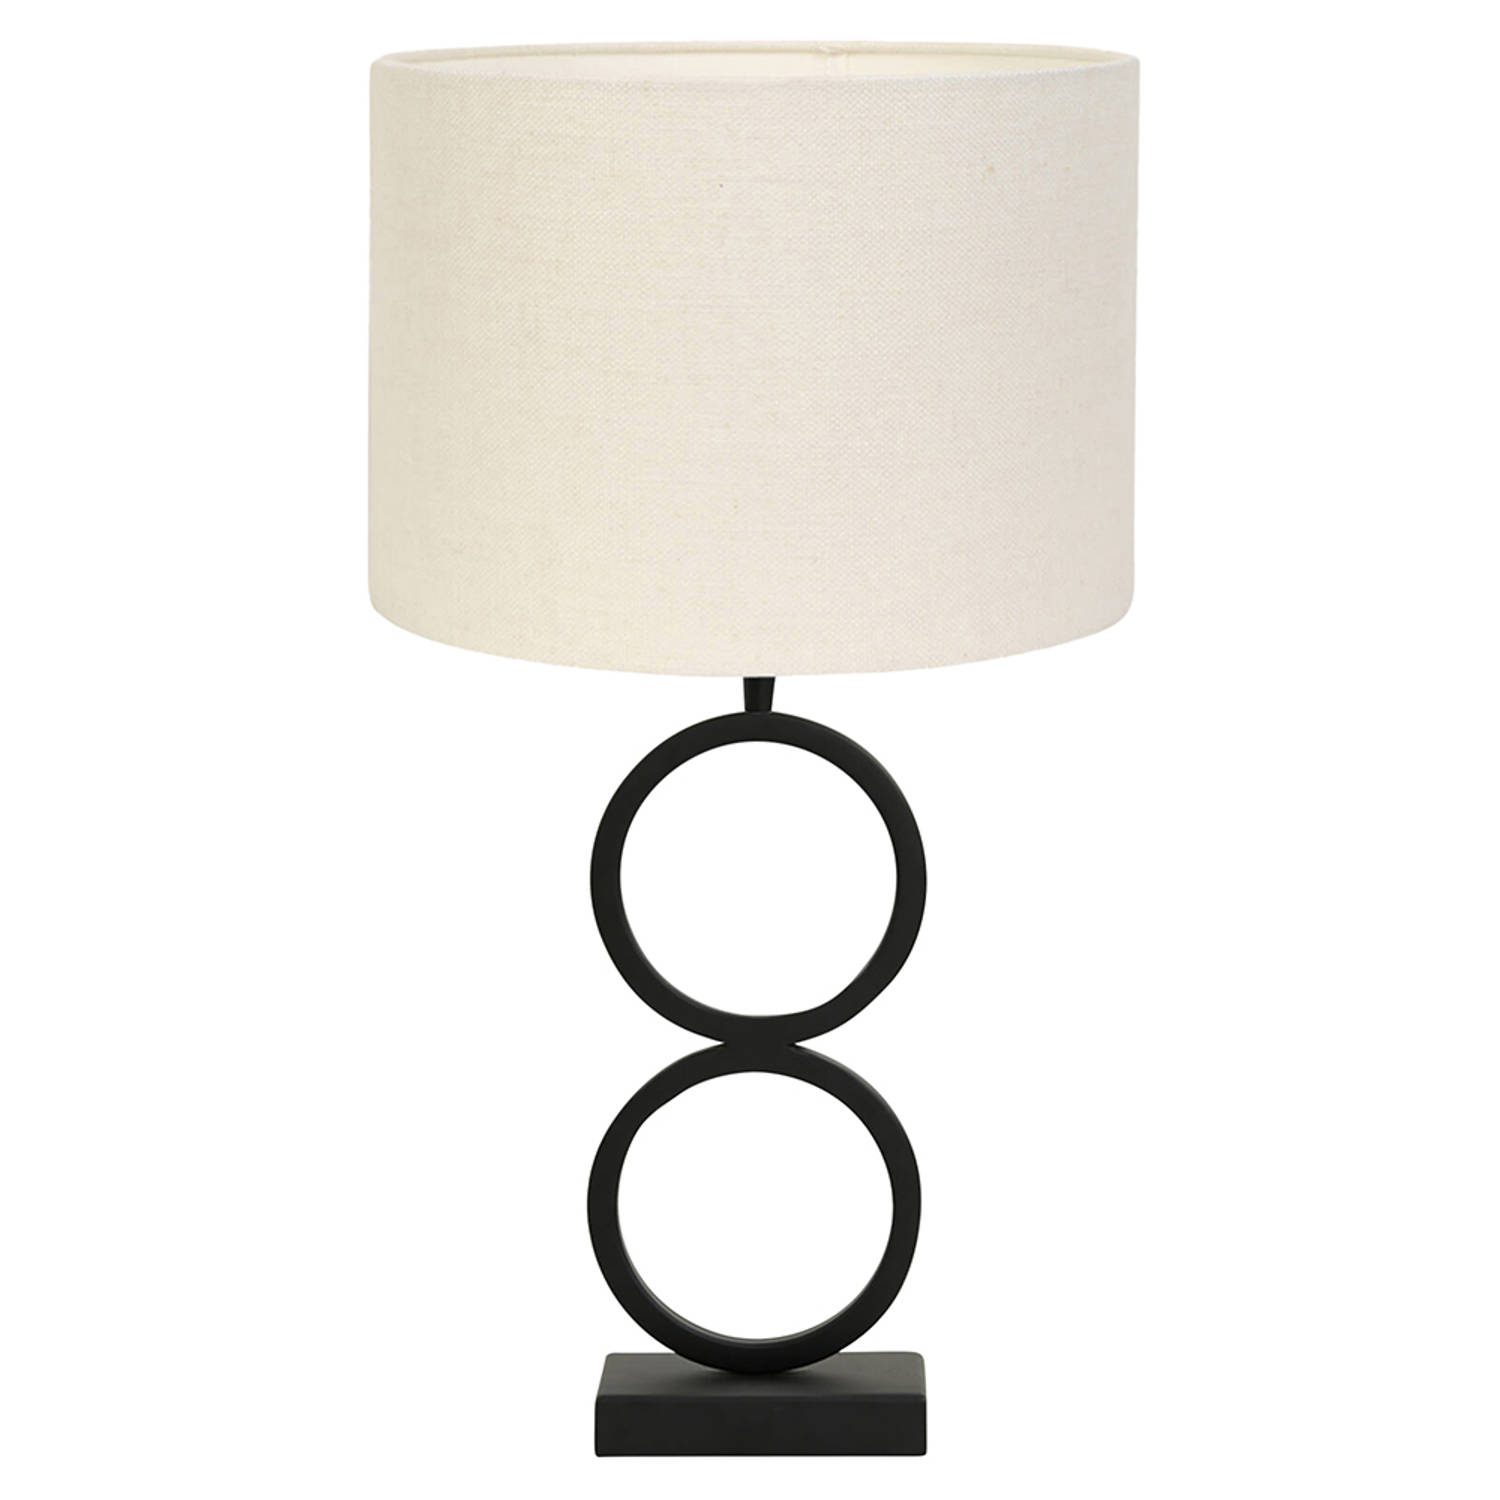 Light and Living Stelios tafellamp - Ø 30 cm - E27 (grote fitting) - wit